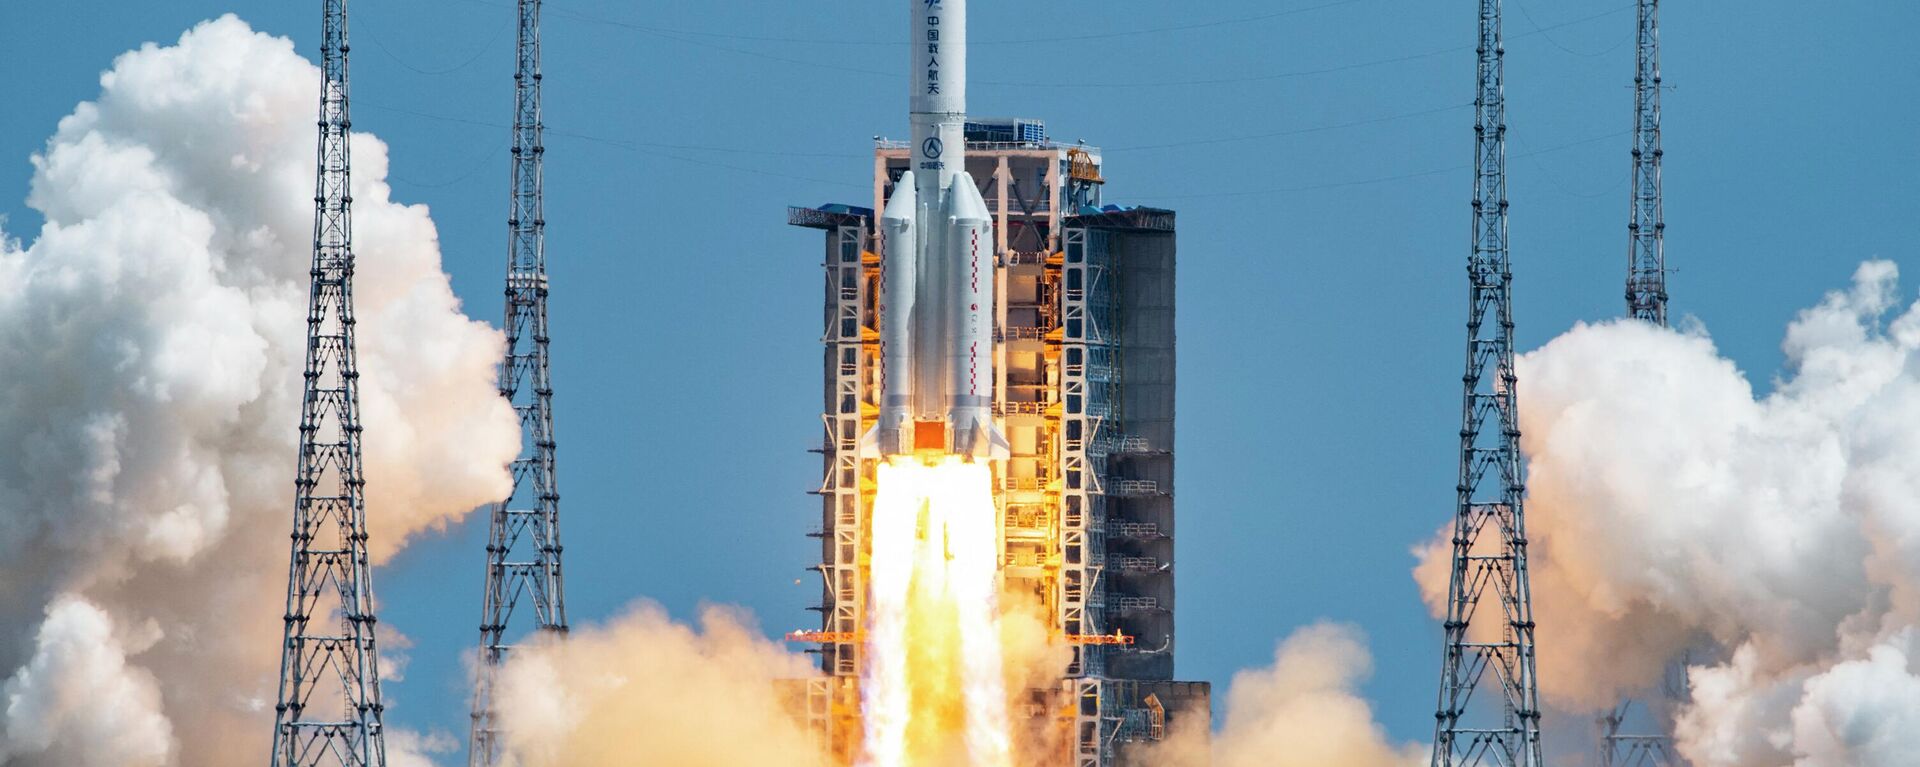 The rocket carrying China’s second module for its Tiangong space station lifts off from Wenchang spaceport in southern China on July 24, 2022. - Sputnik International, 1920, 24.07.2022